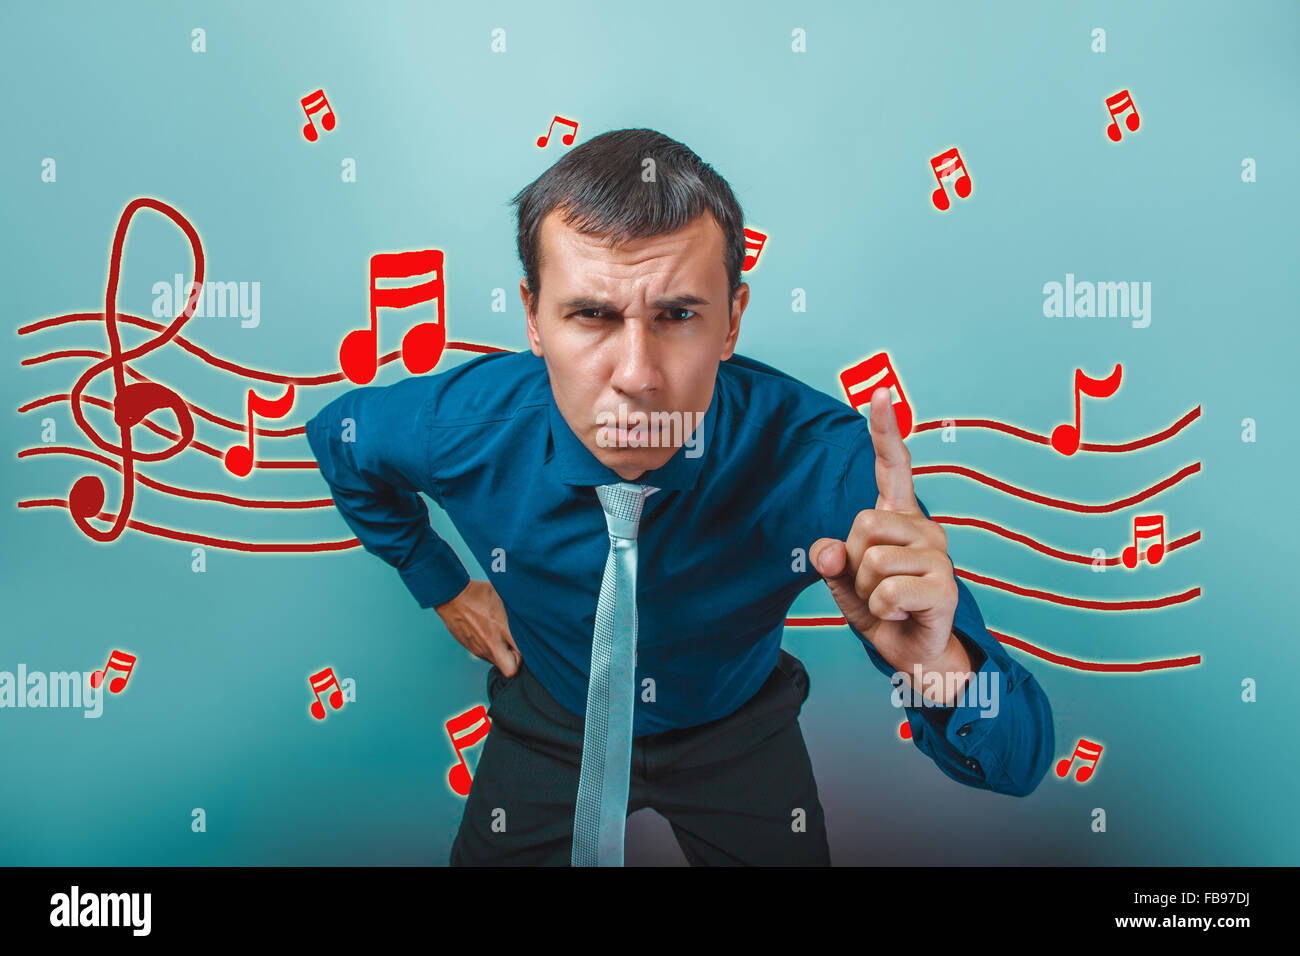 businessman a man frowned warns music notes sketch prevent sound Stock Photo